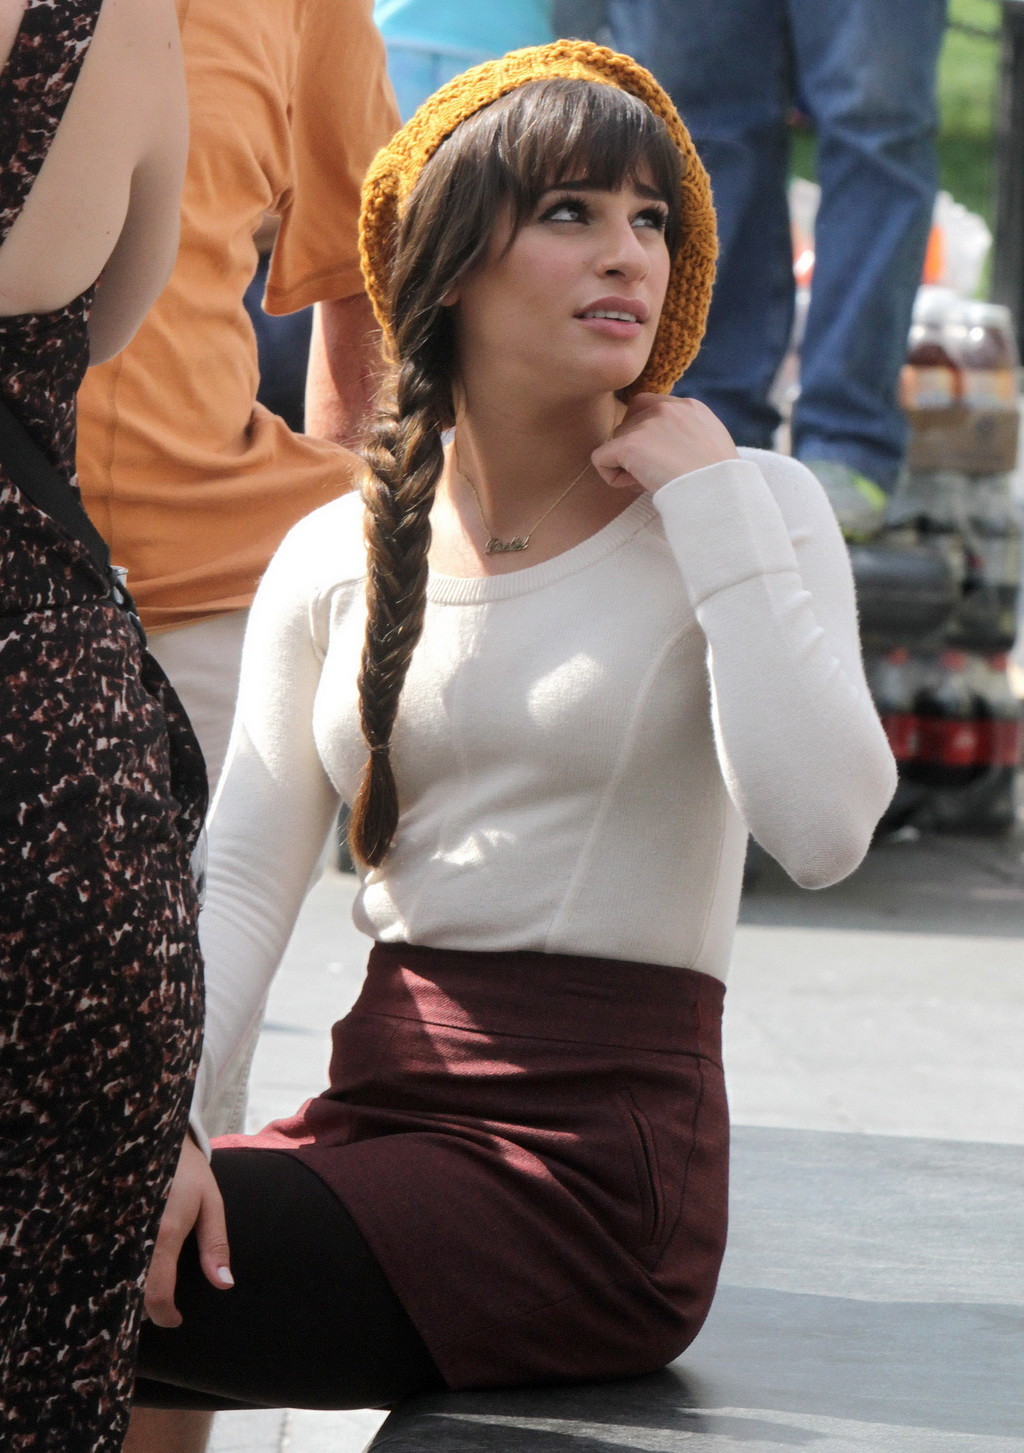 Lea Michele upskirt wearing various mini skirts on the set of Glee in New York C #75254996